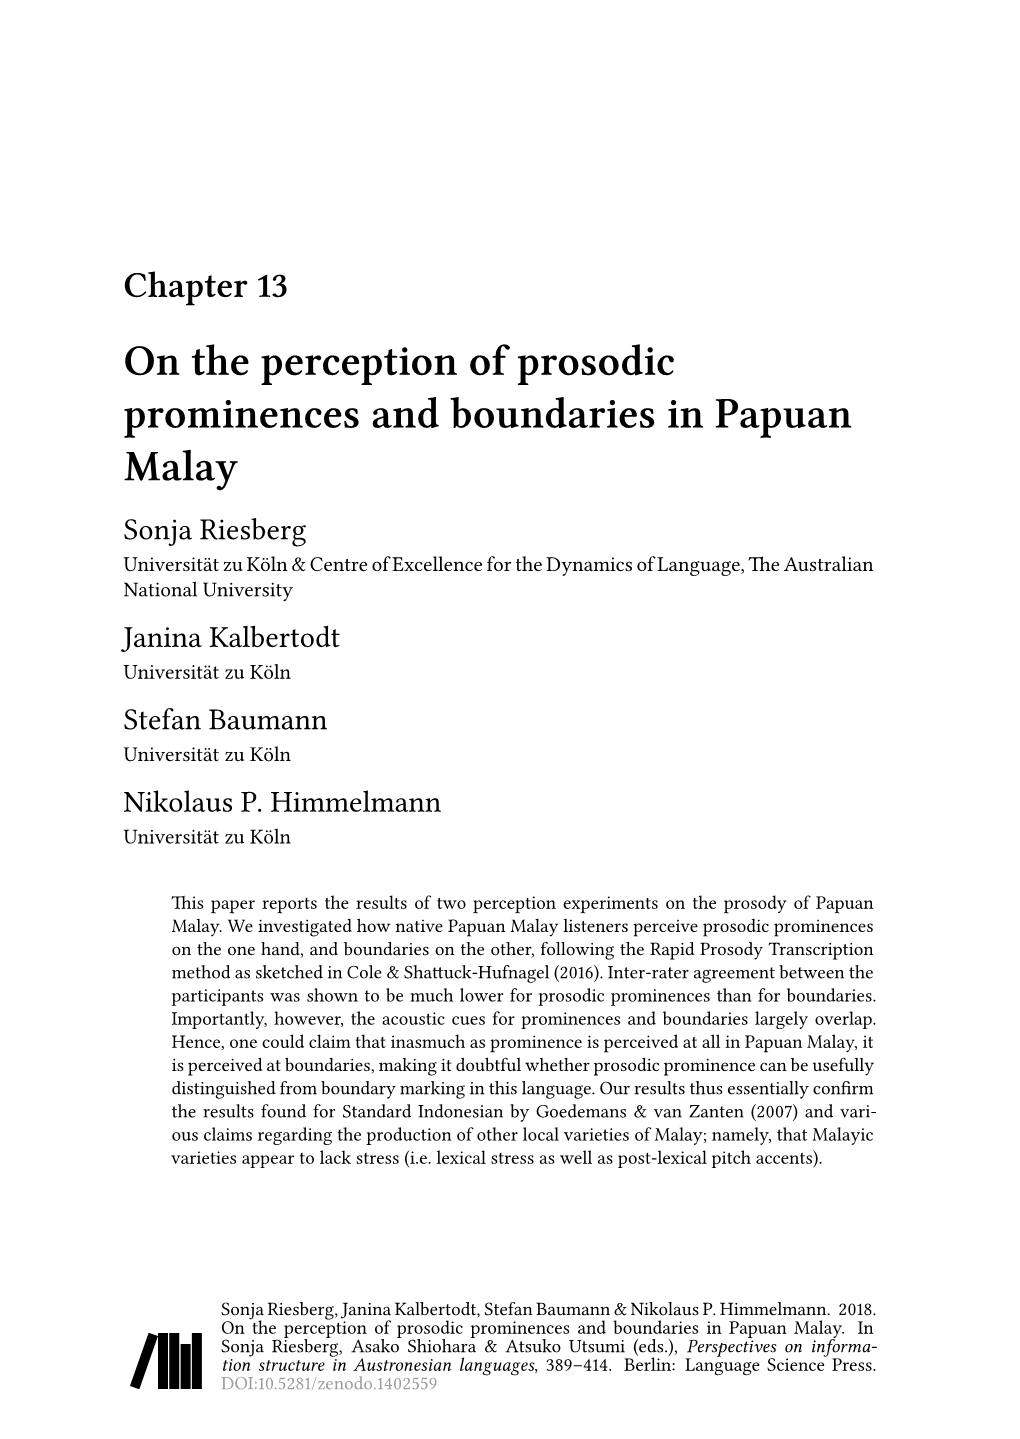 On the Perception of Prosodic Prominences and Boundaries in Papuan Malay